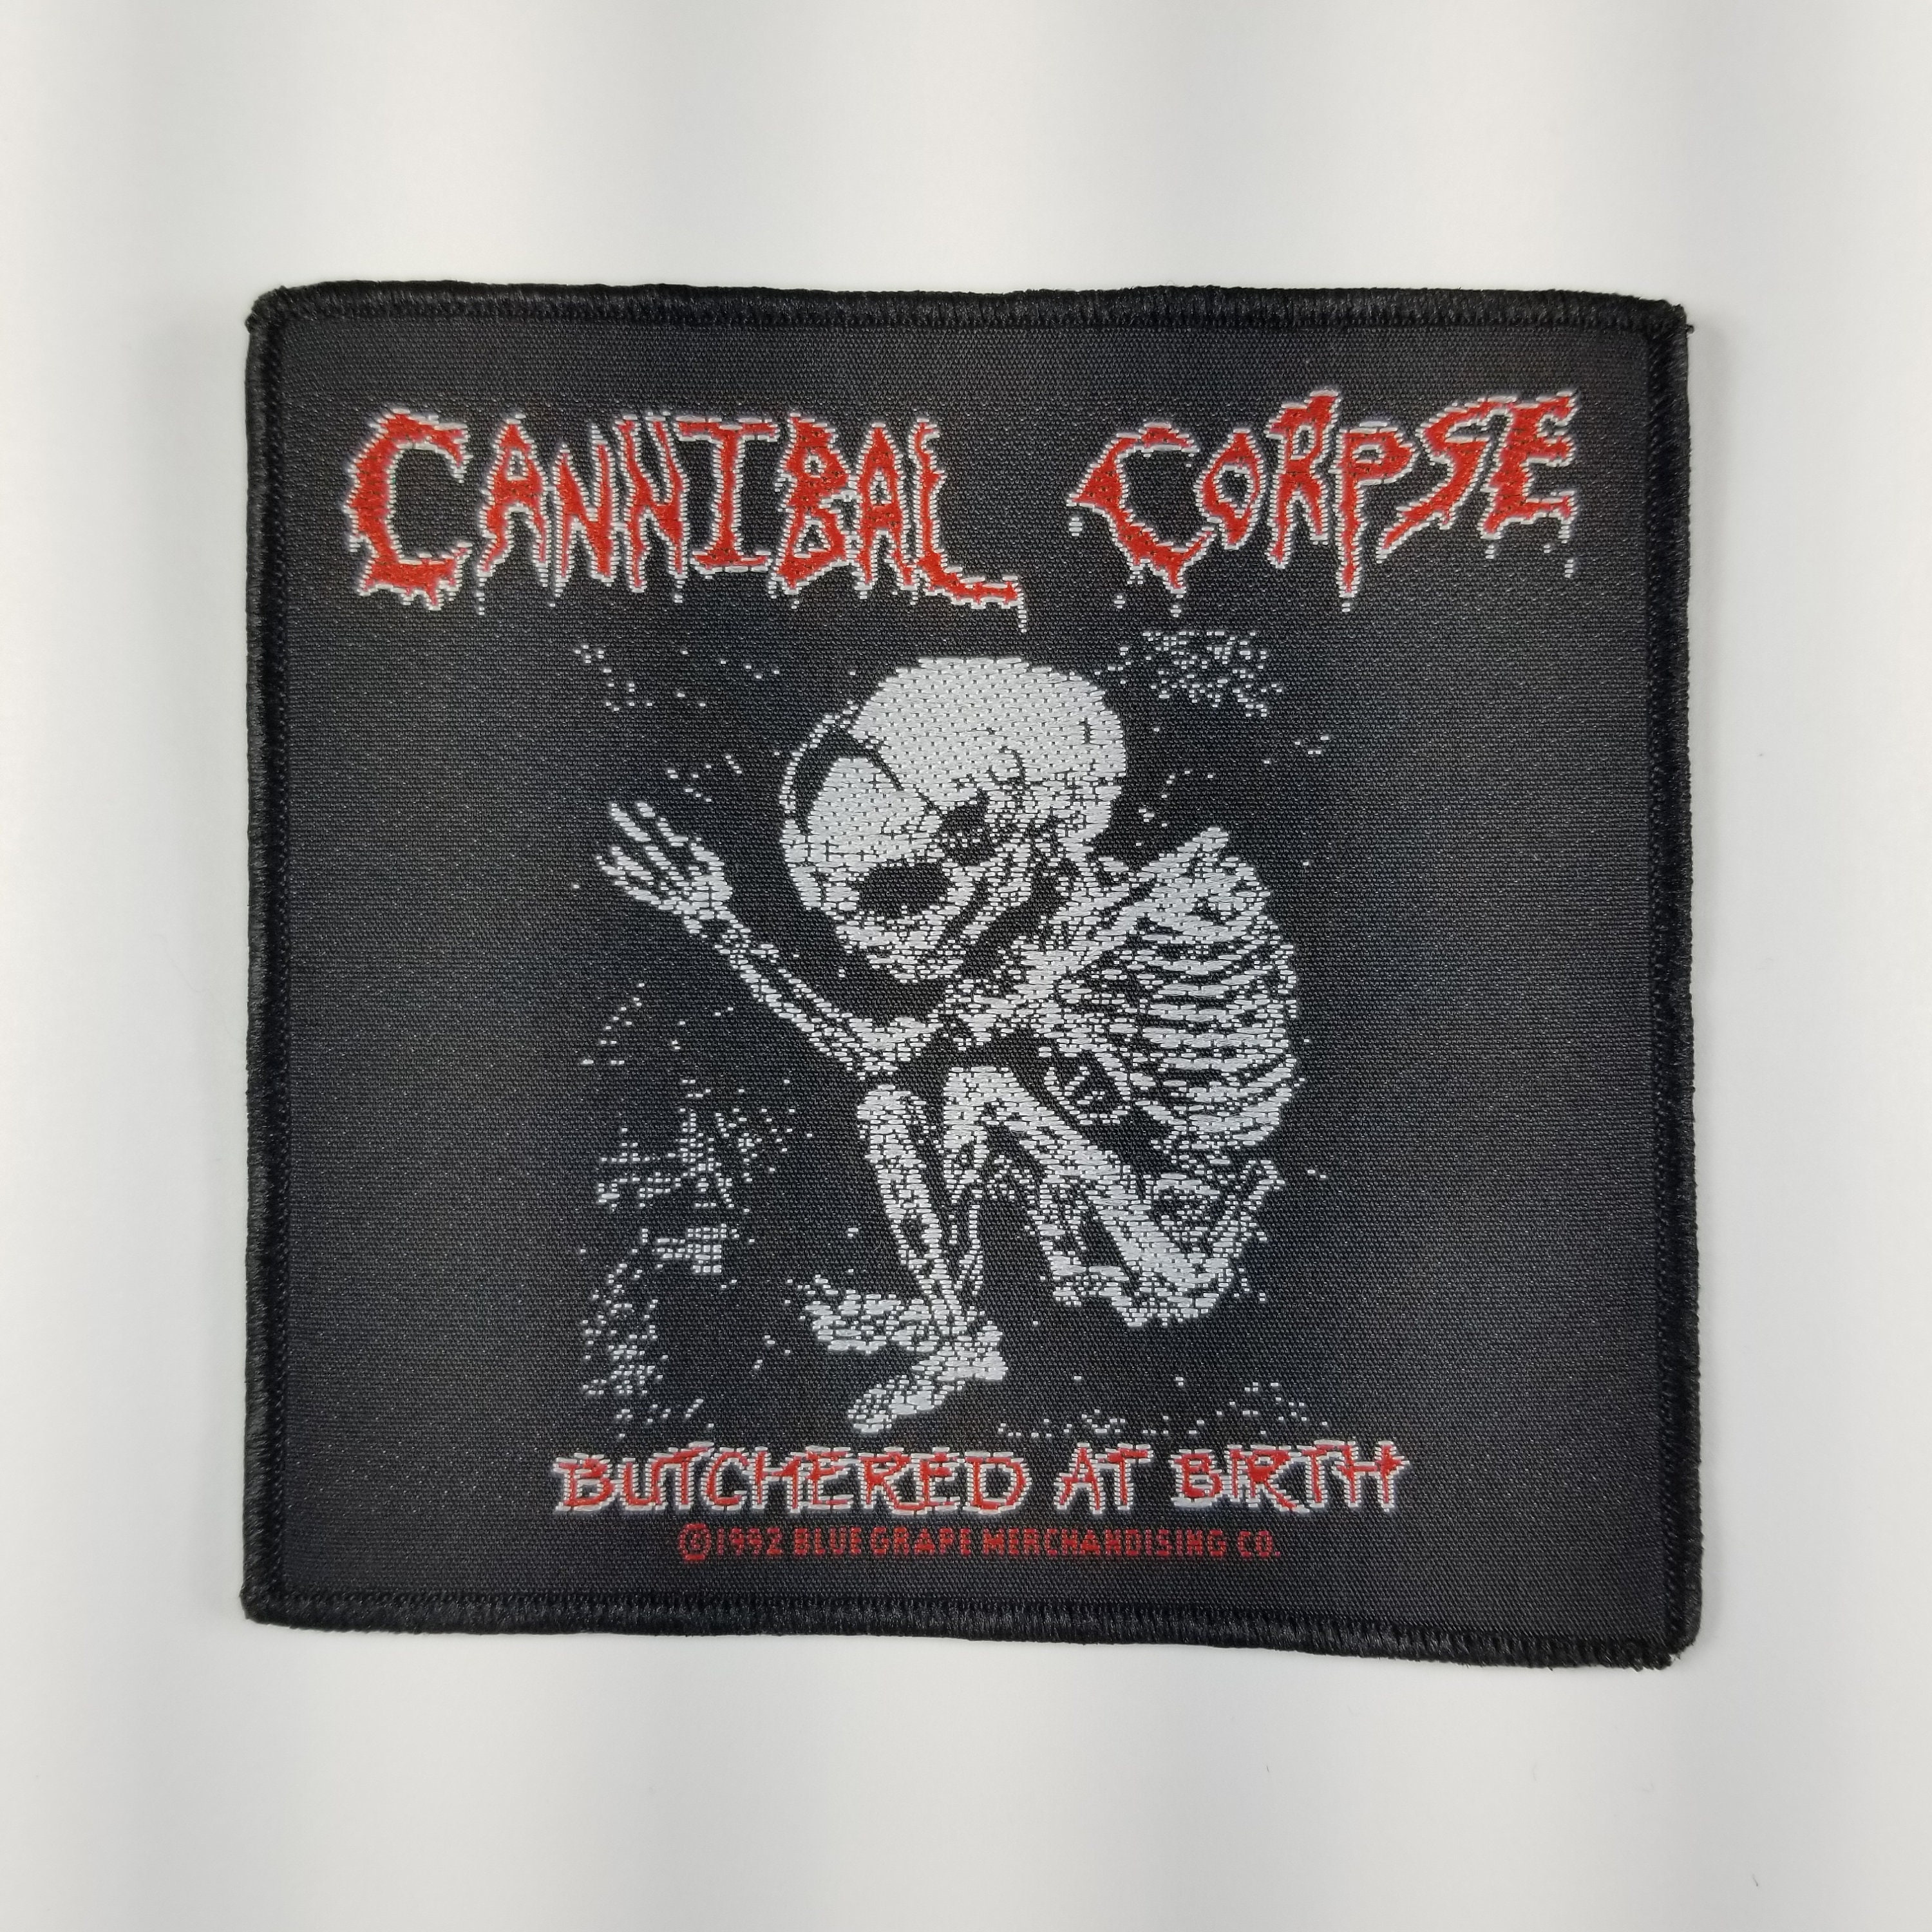 DR WOD - Canibal Box woven velcro patch